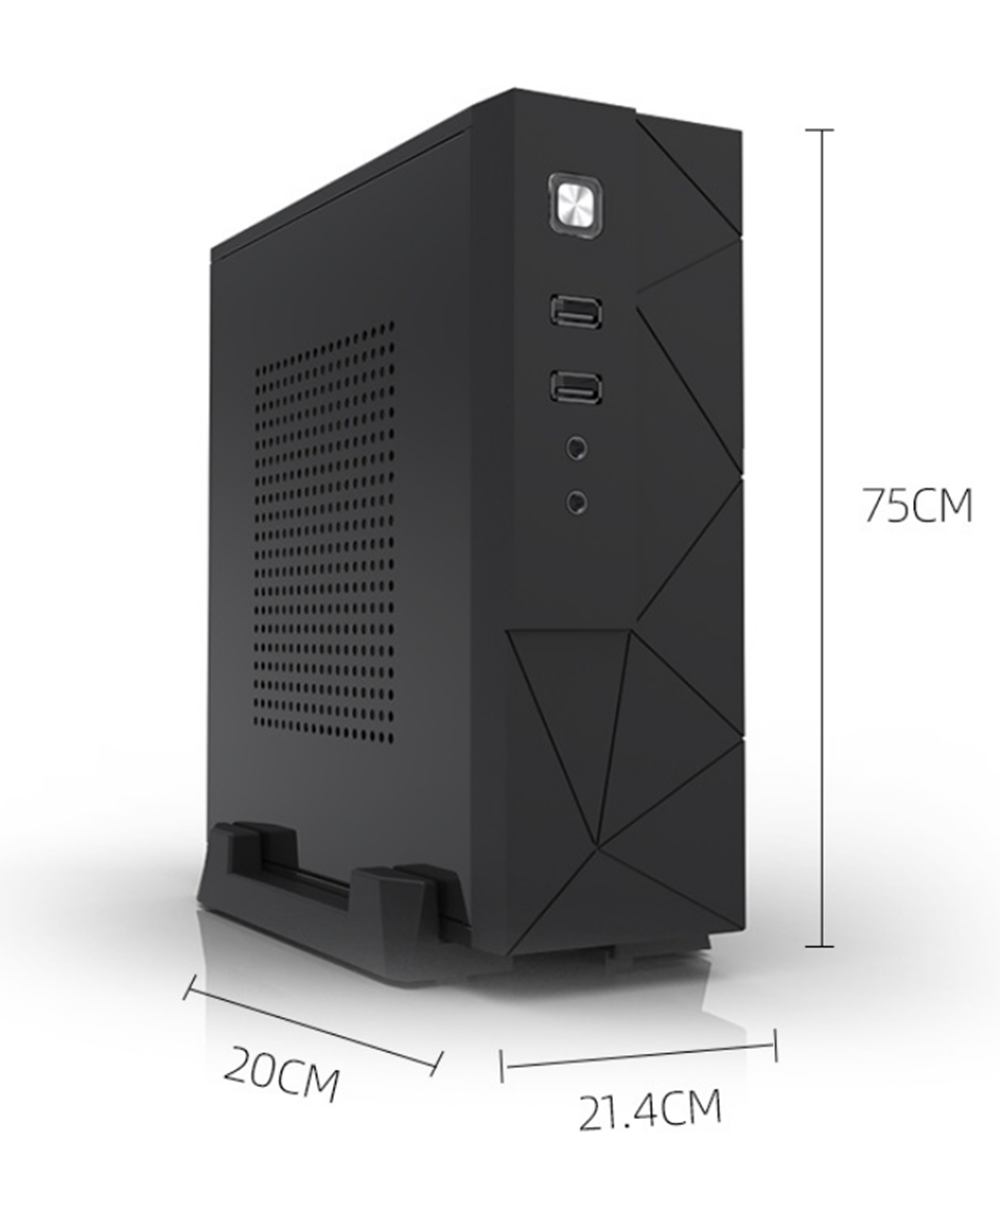 SKTC-MX01-08mm-SECC-Computer-Case-HTPC-Chassis-USB20-Gaming-Tempered-PC-Case-Support-PICO-PSU-Power--1572418